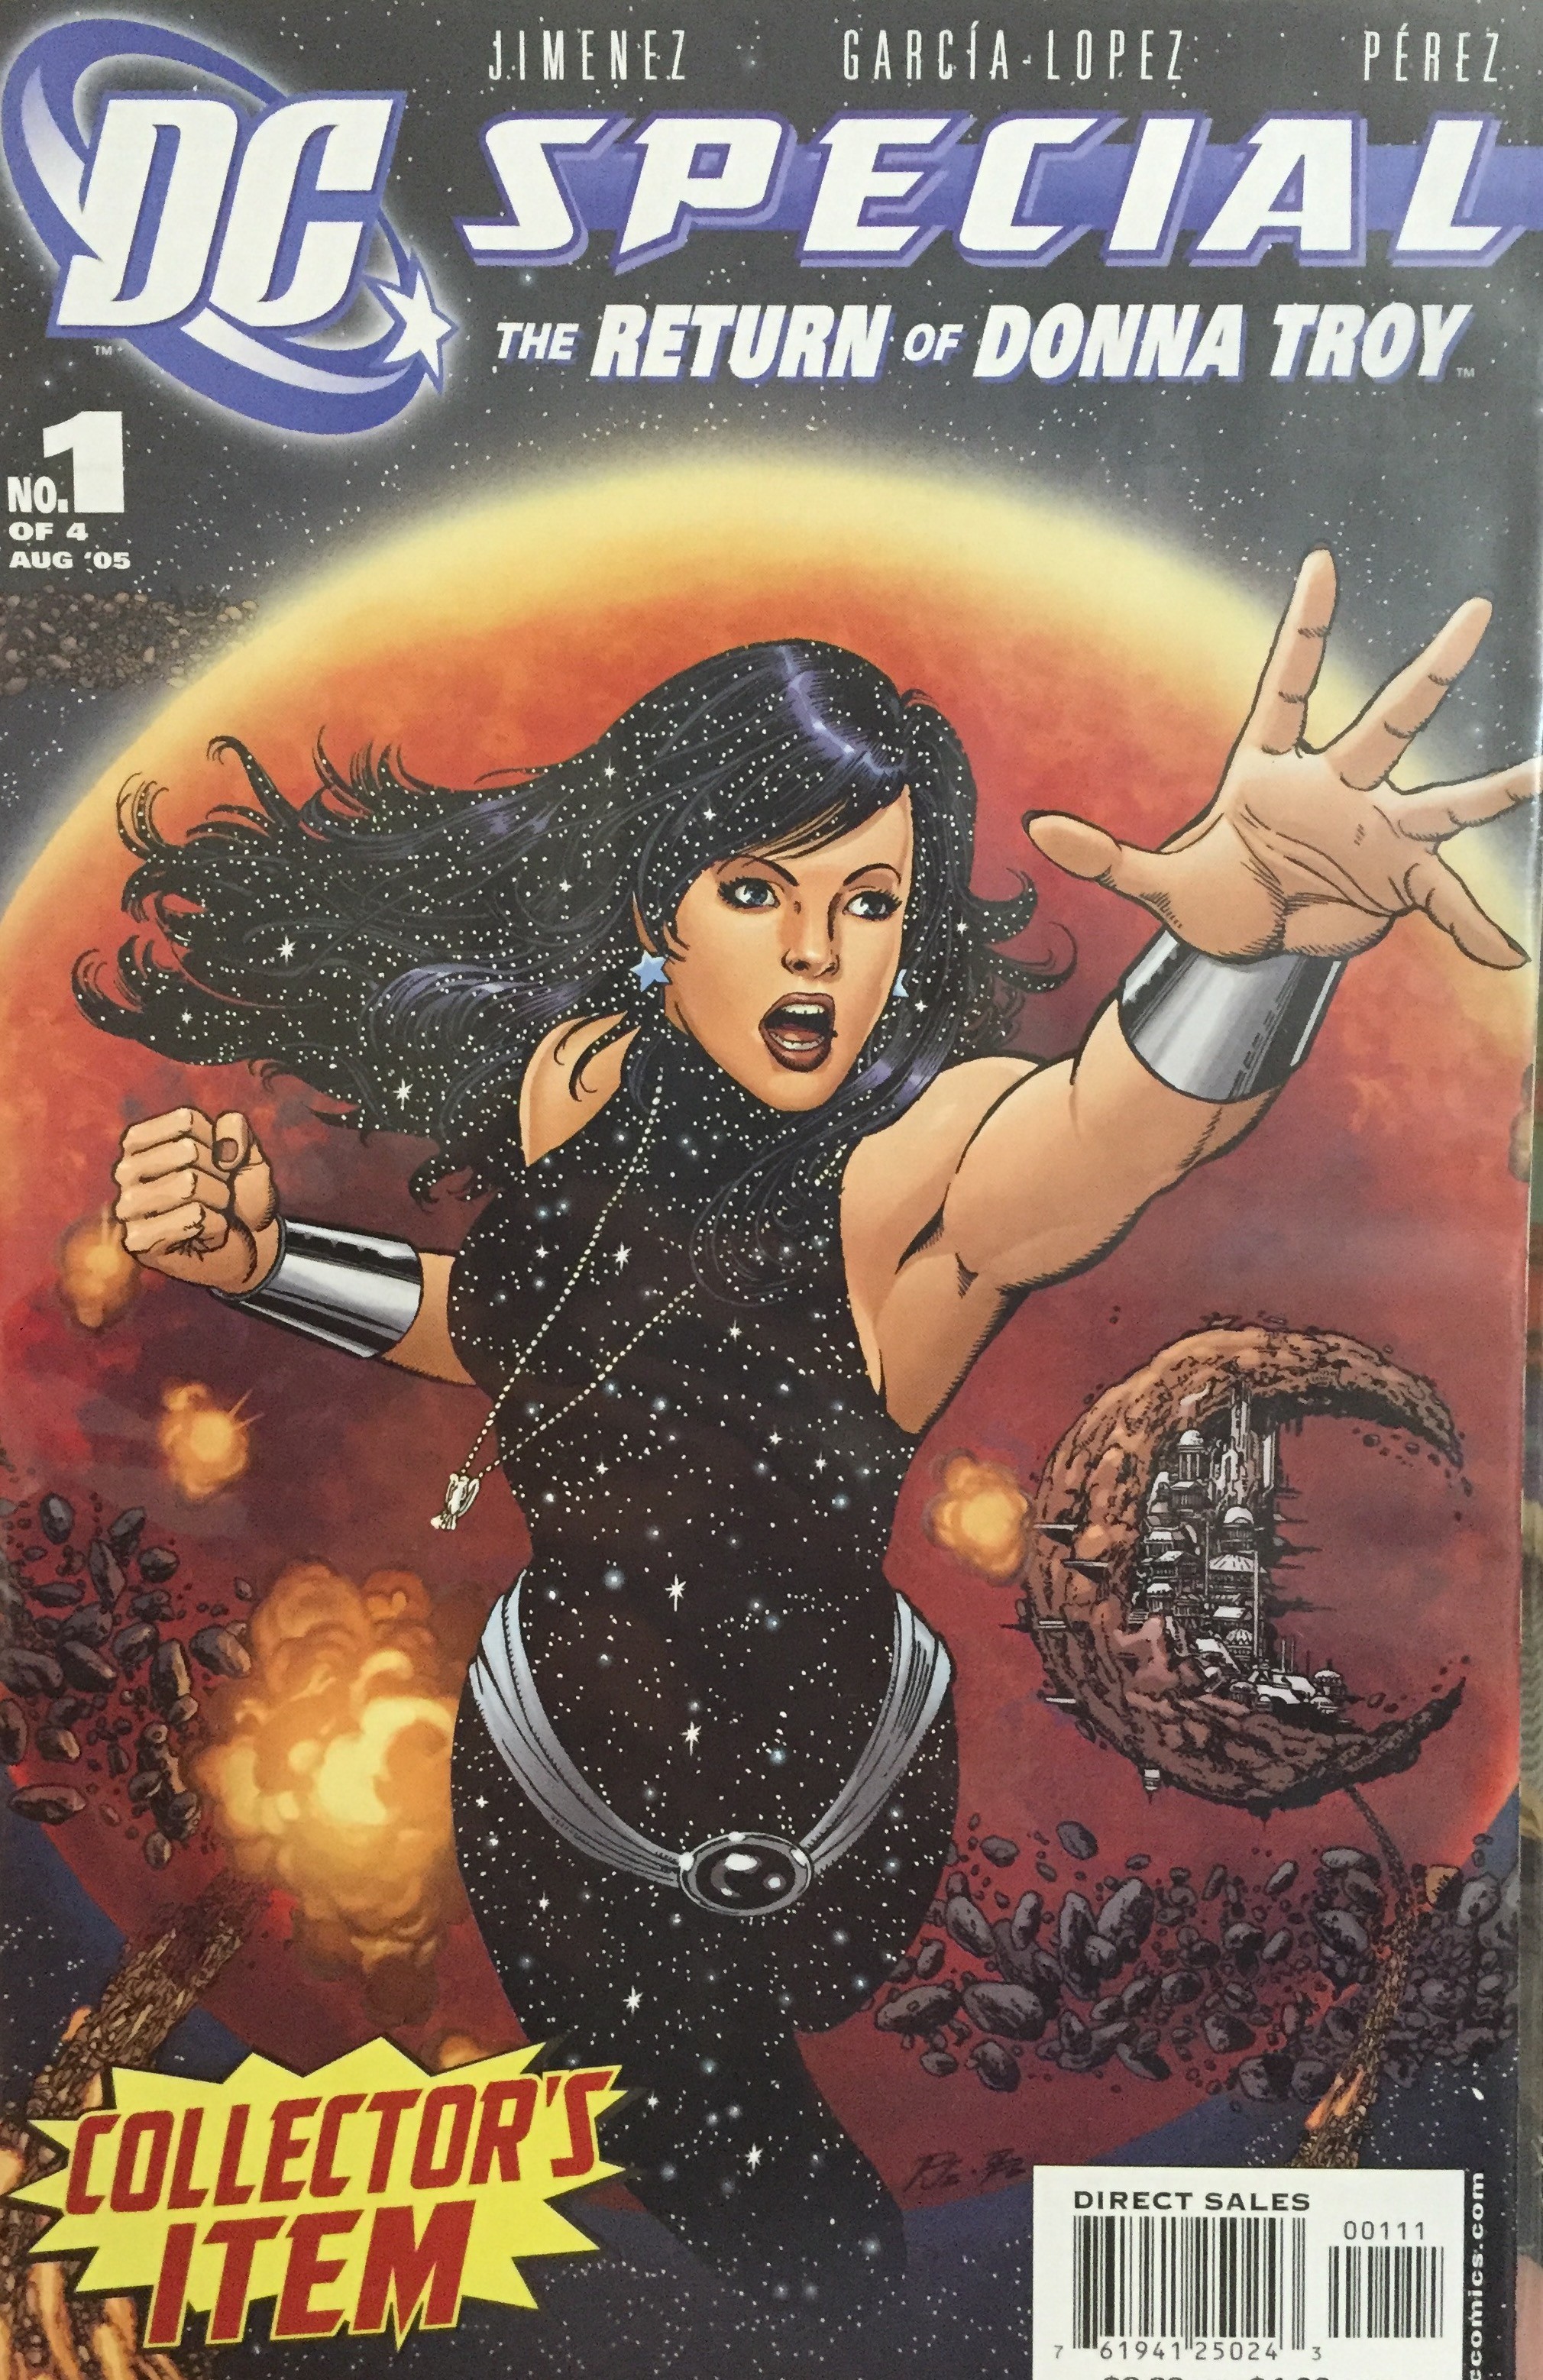 DC Special: The Return of Donna Troy Vol. 1 #1